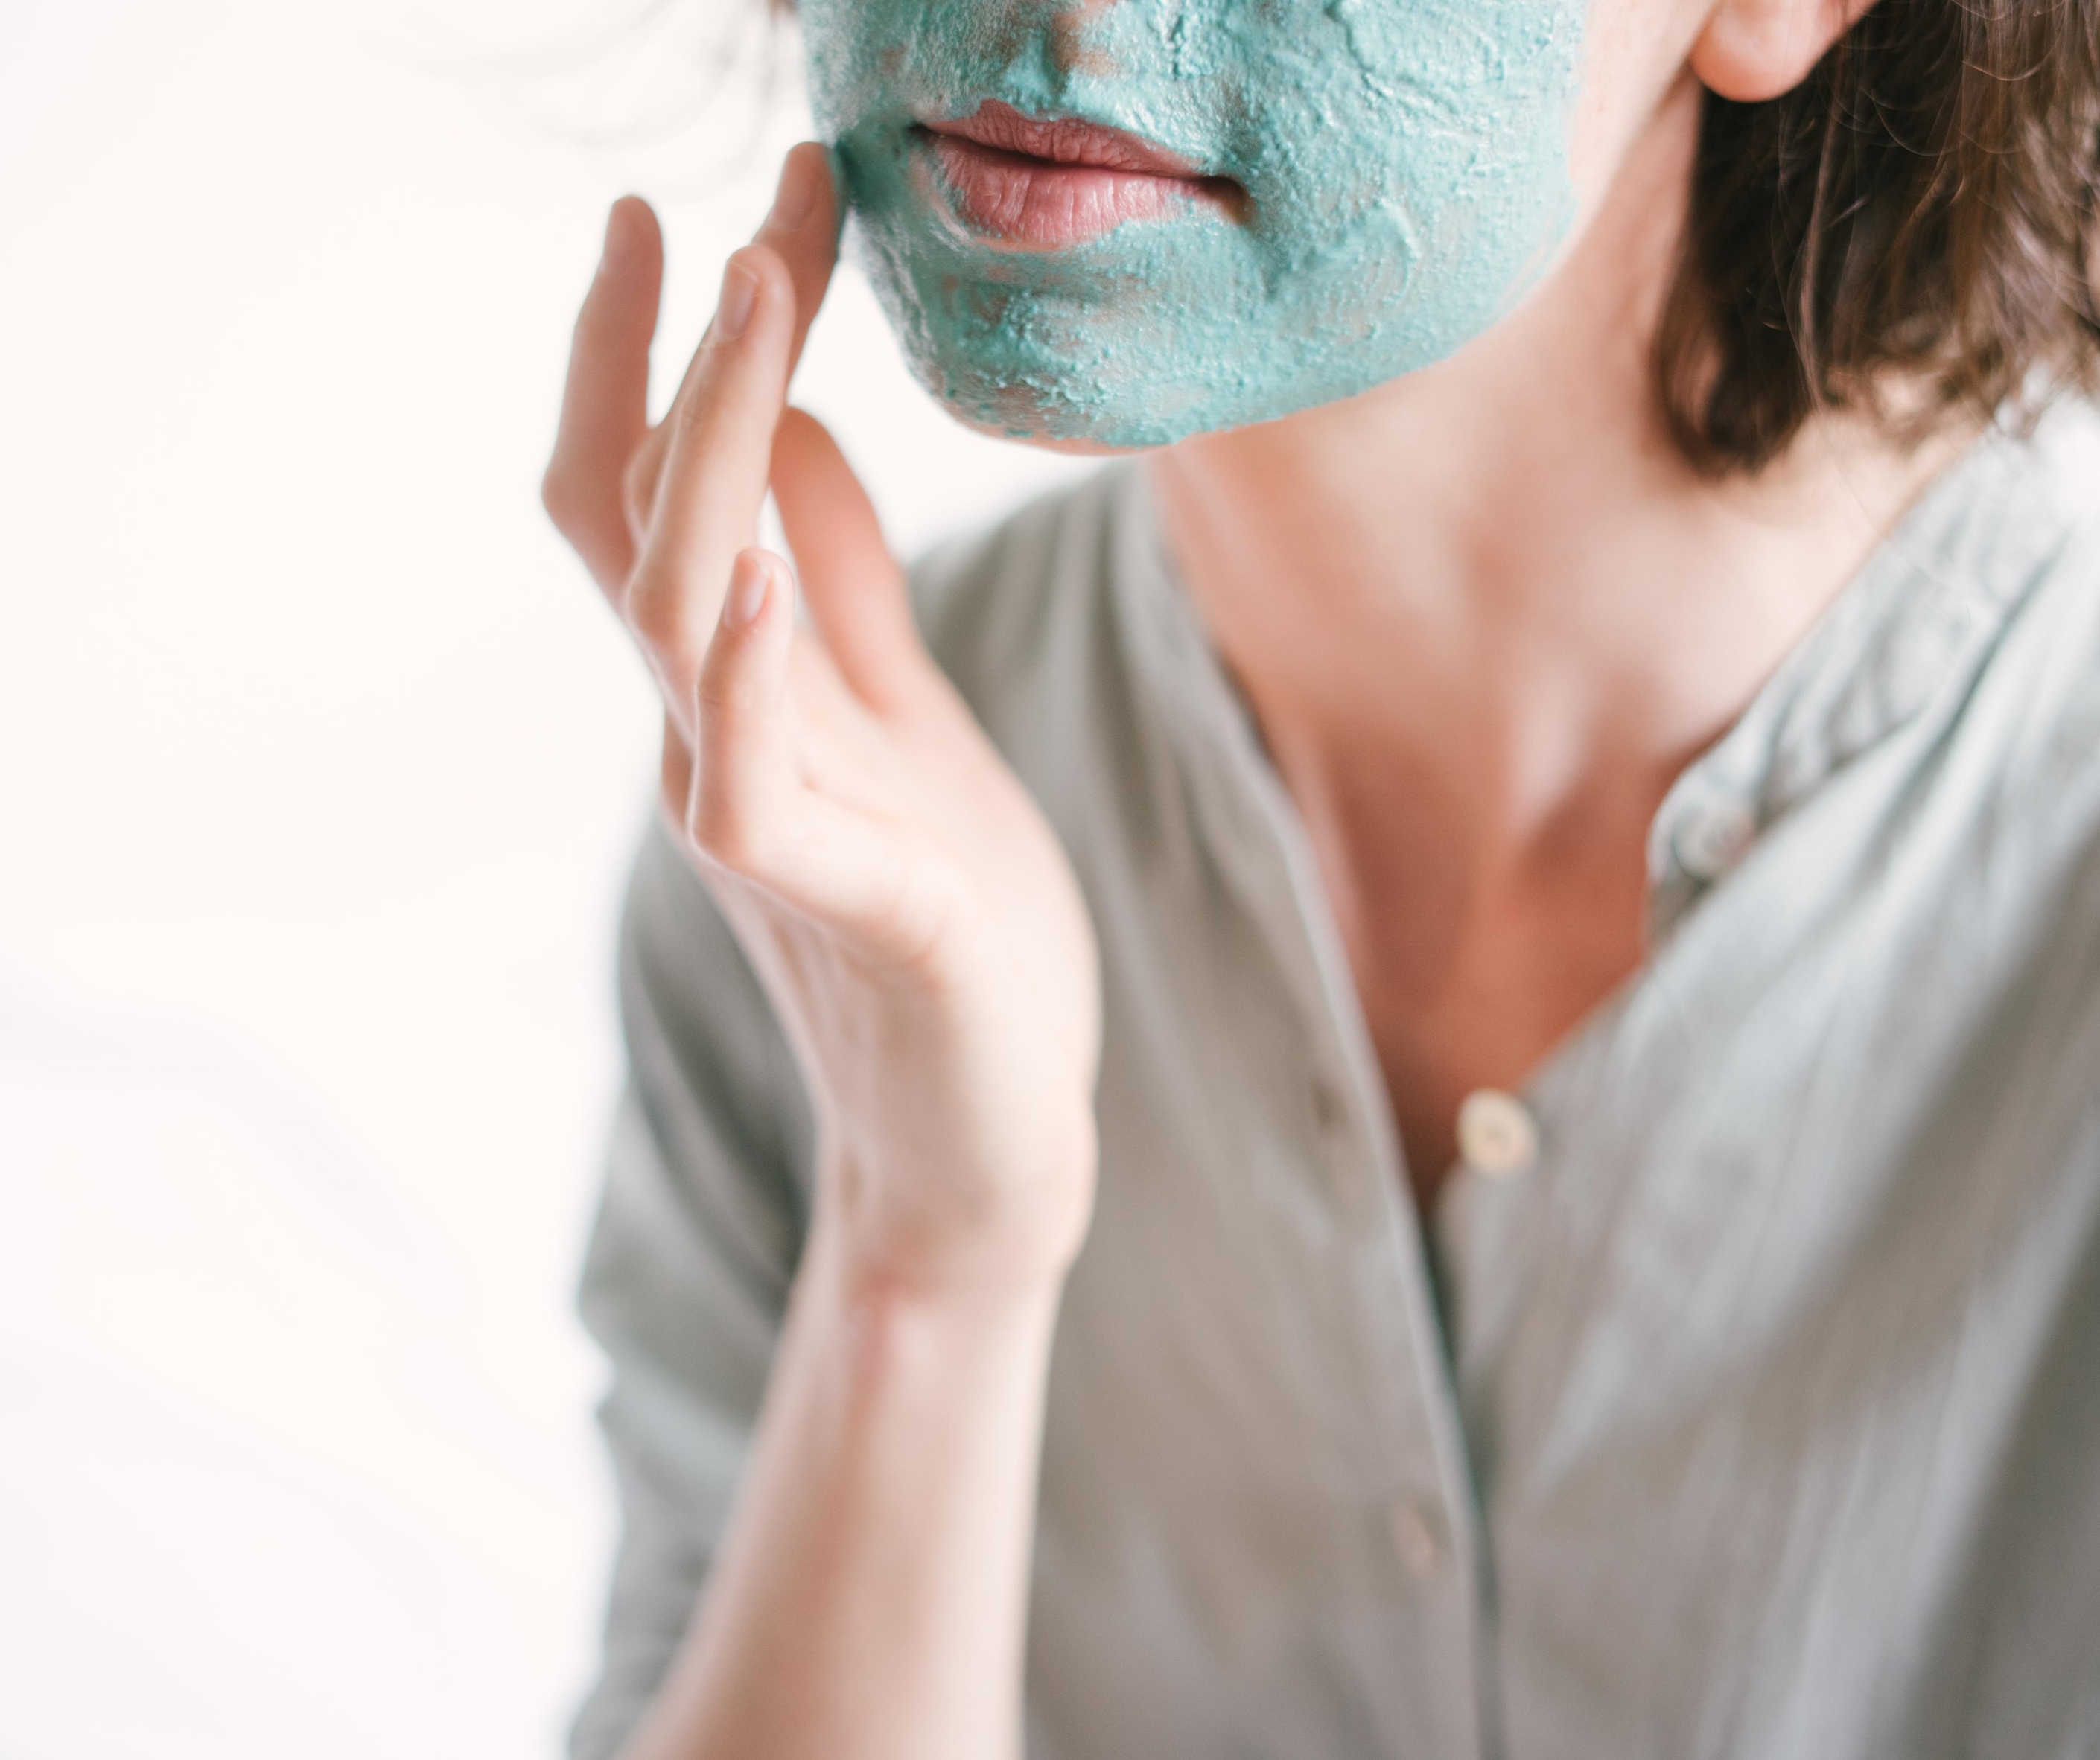 Is Your Skin Care Products Making Your Skin Worse?